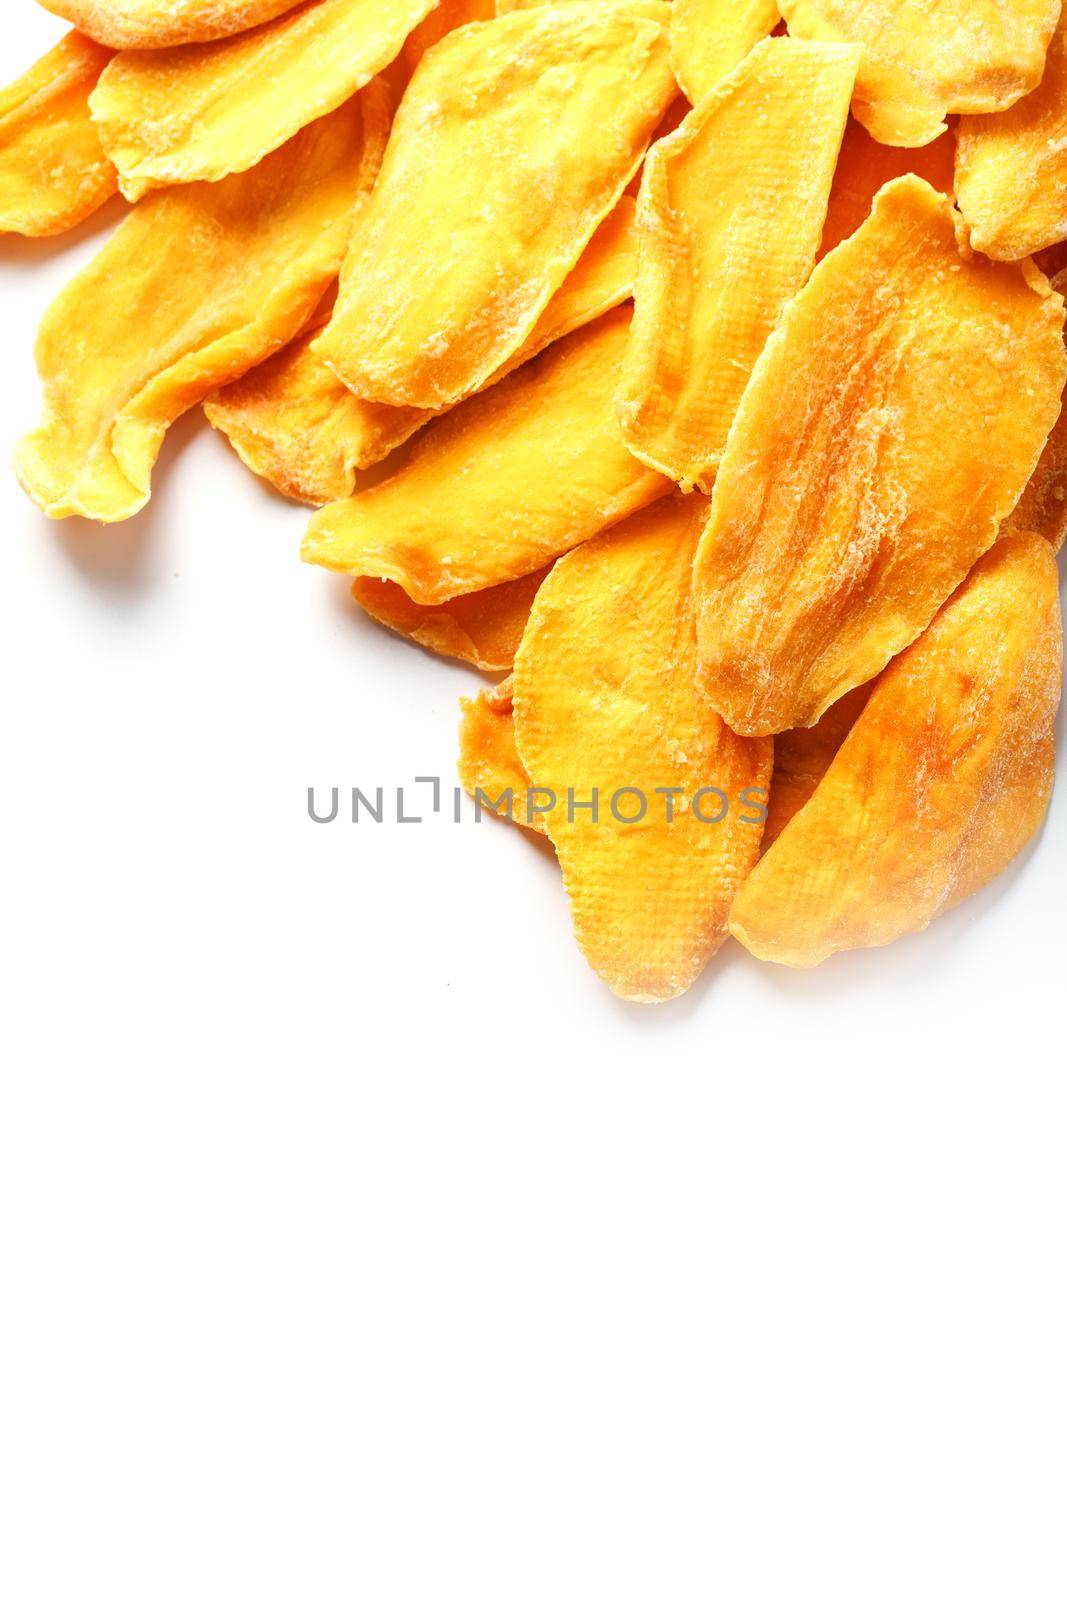 Dried mango sliced on a white background with free space by AlexGrec